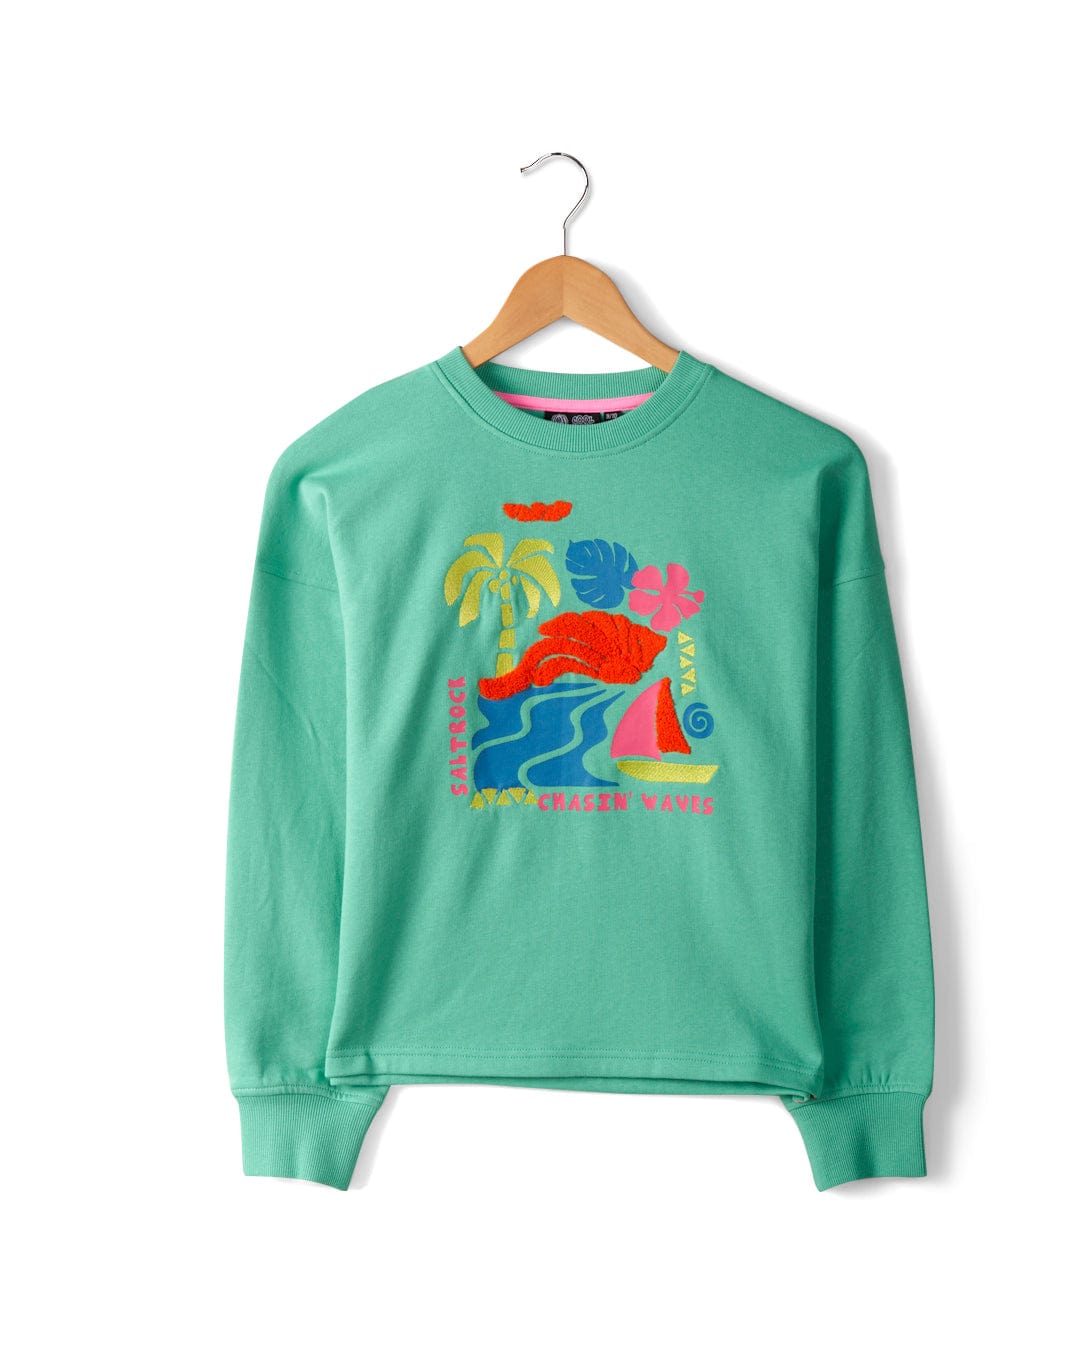 A green sweatshirt with tropical-themed embroidered graphics including palm trees, waves, and a sailboat, hangs on a wooden hanger against a white background. The Saltrock Summer Block - Kids Sweat - Green branding adds an extra touch of coastal charm.